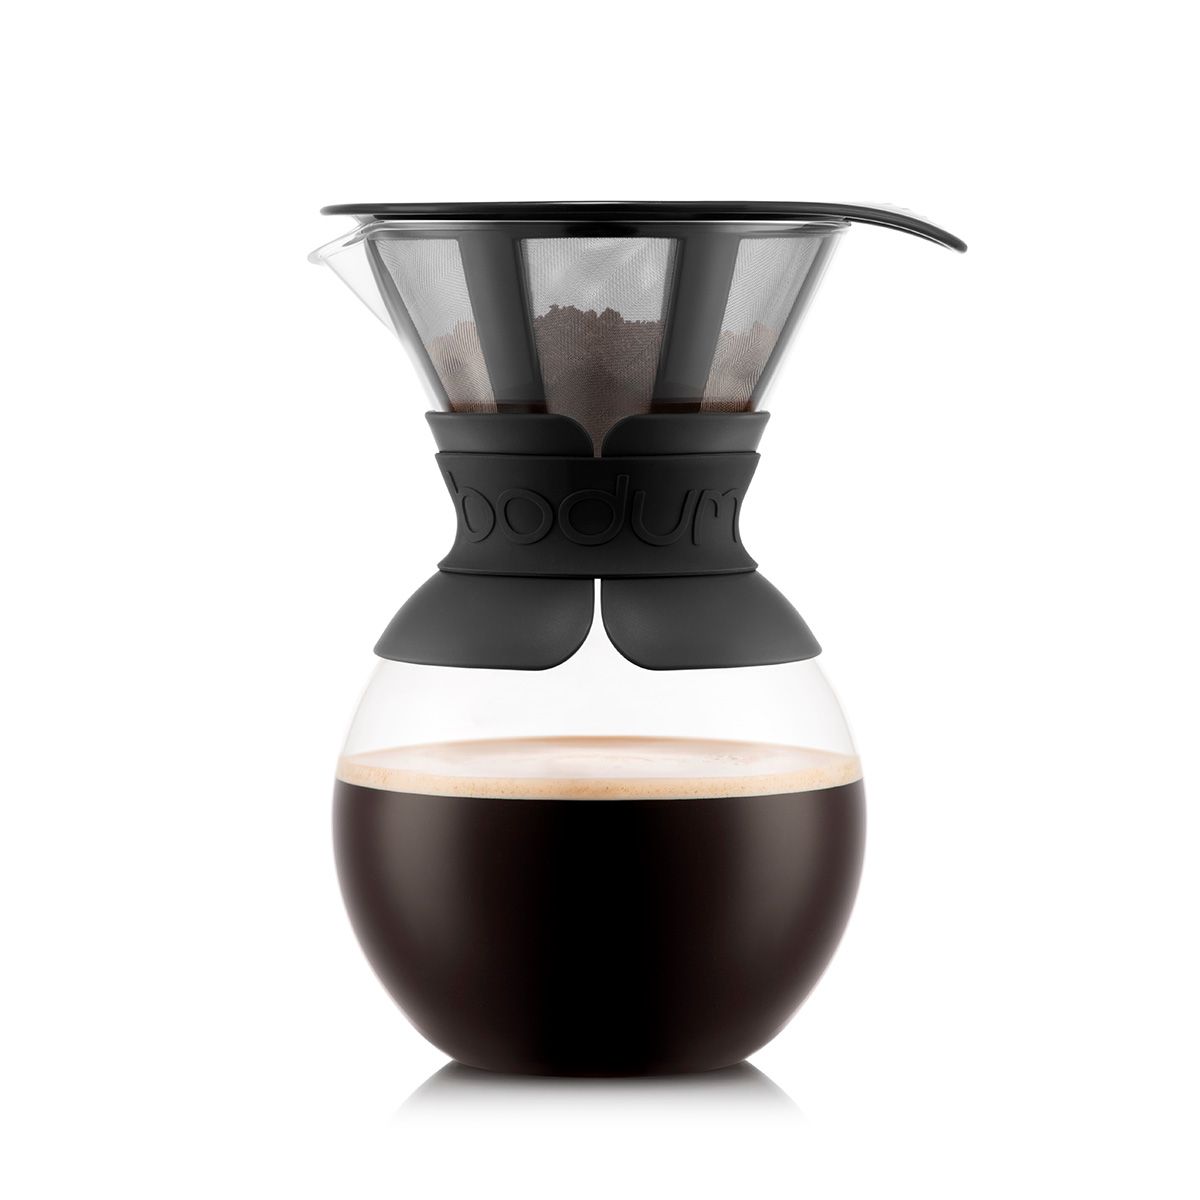 Limited Edition Bodum Pour Over Coffee Maker, Black